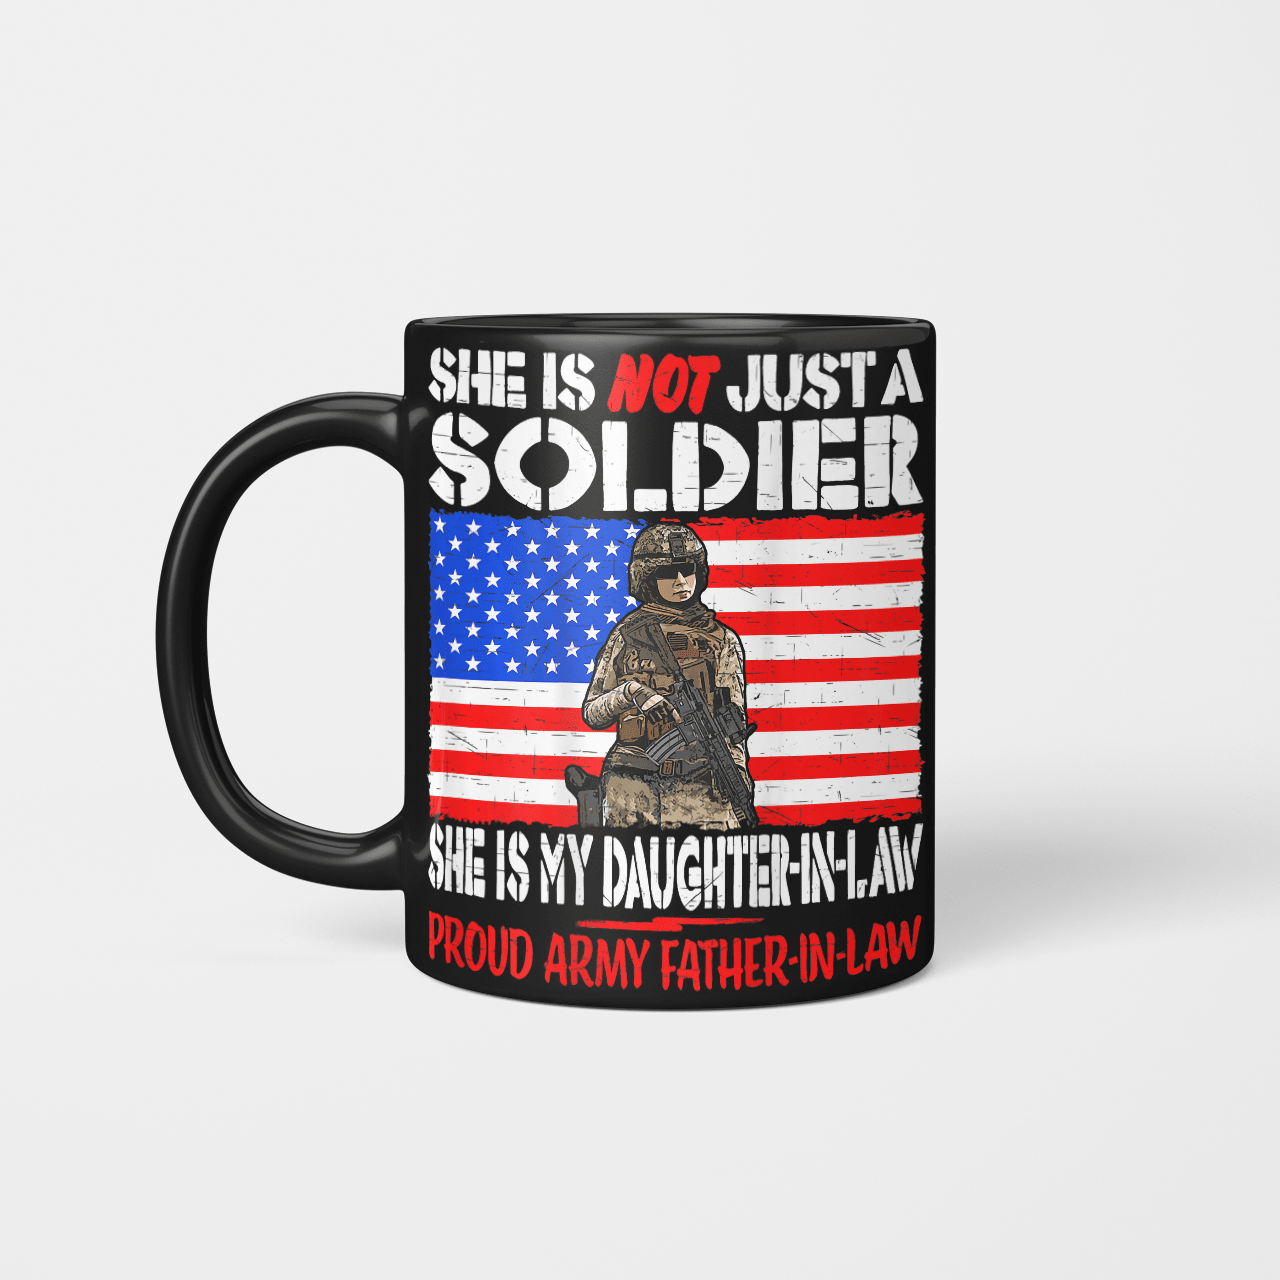 My Daughter-In-Law Is A Soldier Fil